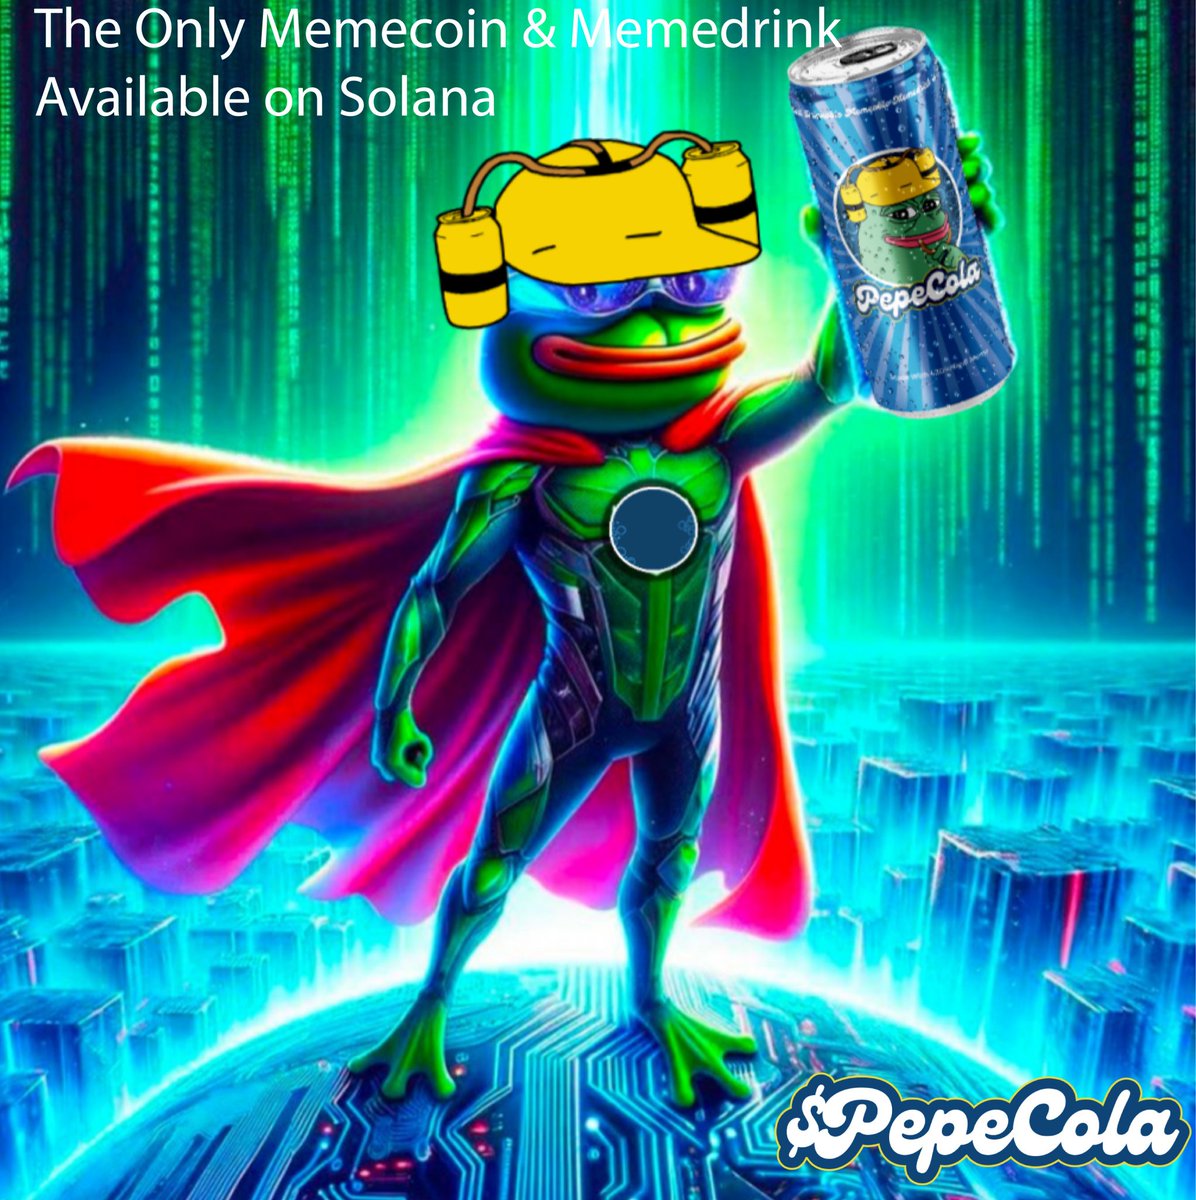 #PepeCola the most drinkable memeable memedrink in existence! 🥤

@PepeCola_Meme newly launched on Solana 🚀

💲Experienced Marketing Team
🇺🇸 USA Based Devs
🍺 Food and Beverage Industry Experts

✅ Burnt LP
✅ Mint & Freeze Authority Revoked
✅ 10% of Supply for Airdrops
✅ RWC…